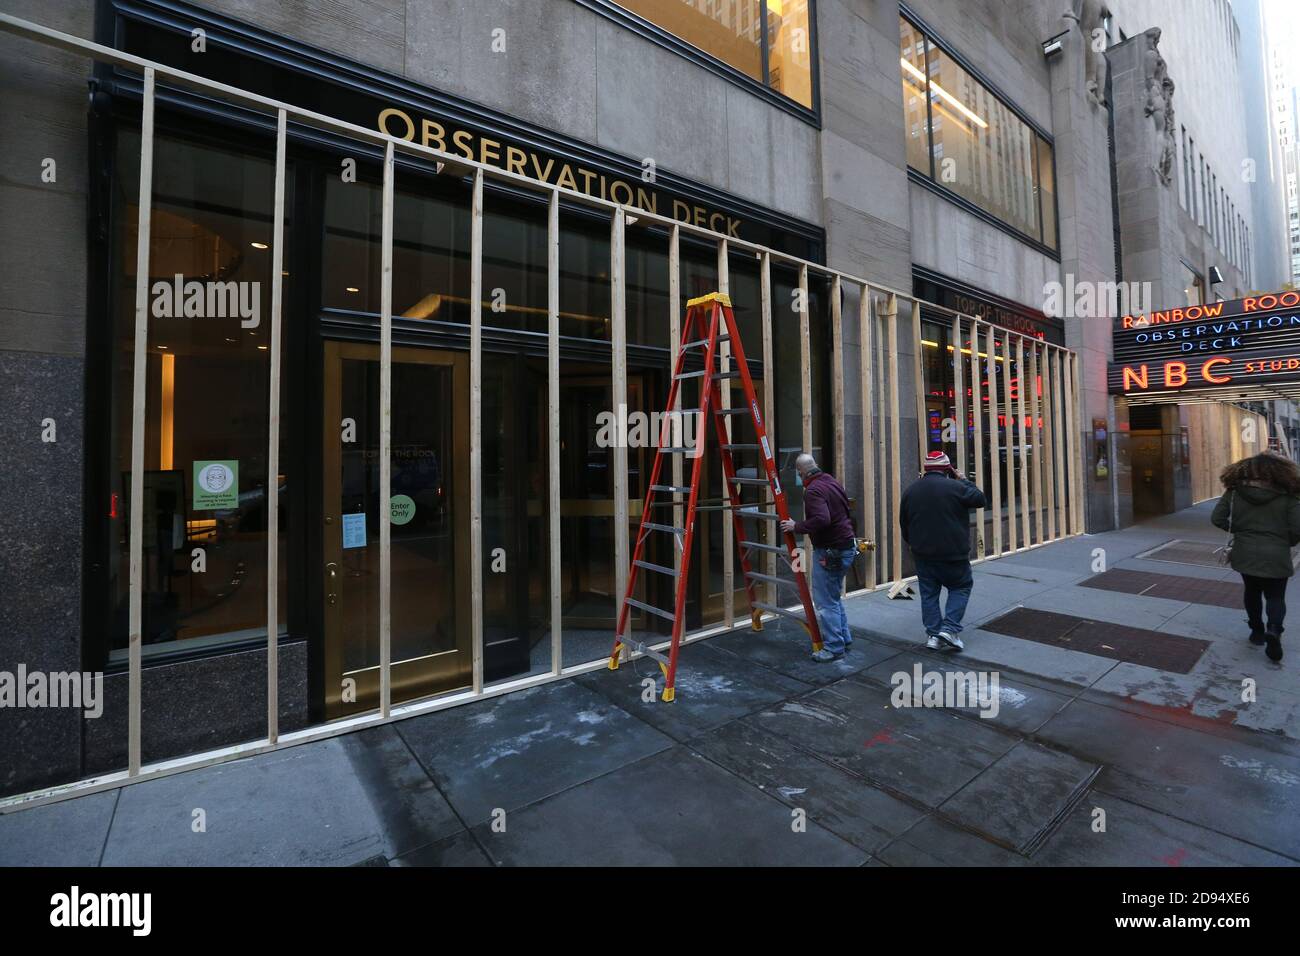 New York, NY, USA. 2nd Nov, 2020. Nov 2, 2020 : New York Stores prepare for possible unrest surrounding election day. The Entrance to the Observation Deck at Rockefeller Center is boarded up, Credit: Dan Herrick/ZUMA Wire/Alamy Live News Stock Photo